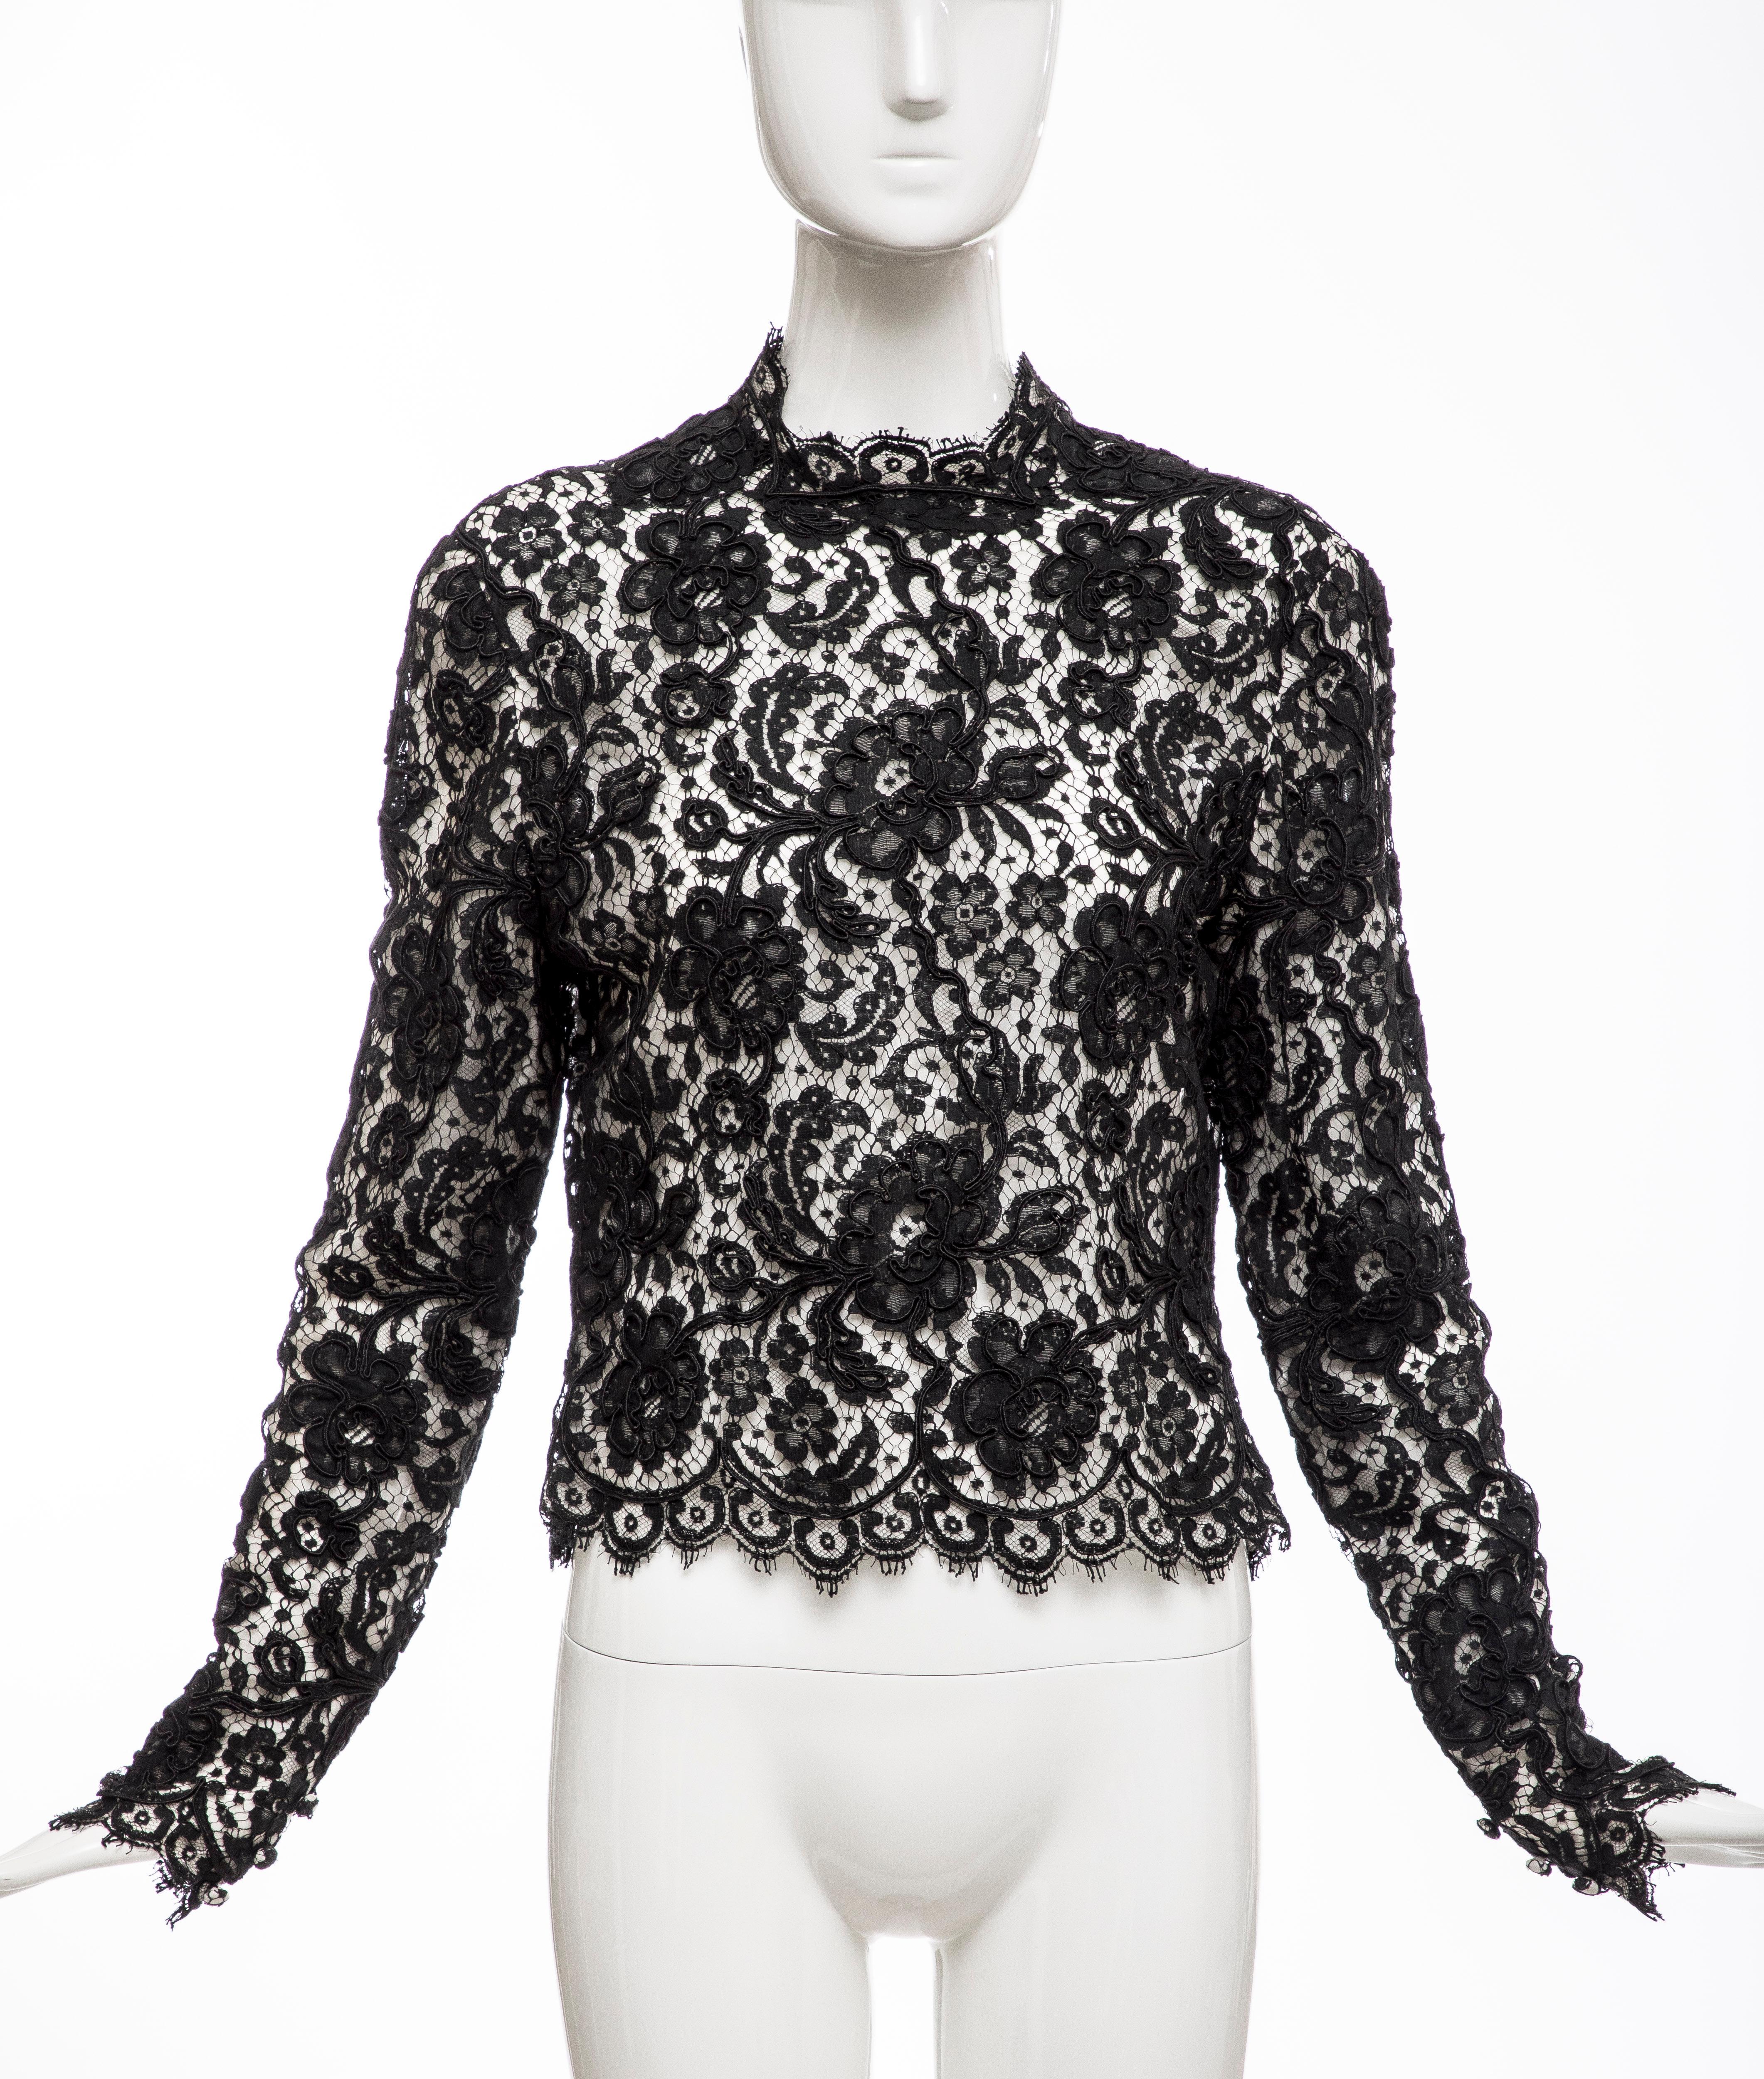 Bill Blass, Circa: 1970's, black lace long sleeve top with back zip and silk chiffon lining.

US: 10

Bust: 38' Waist; 34 and Total Length: 22'.